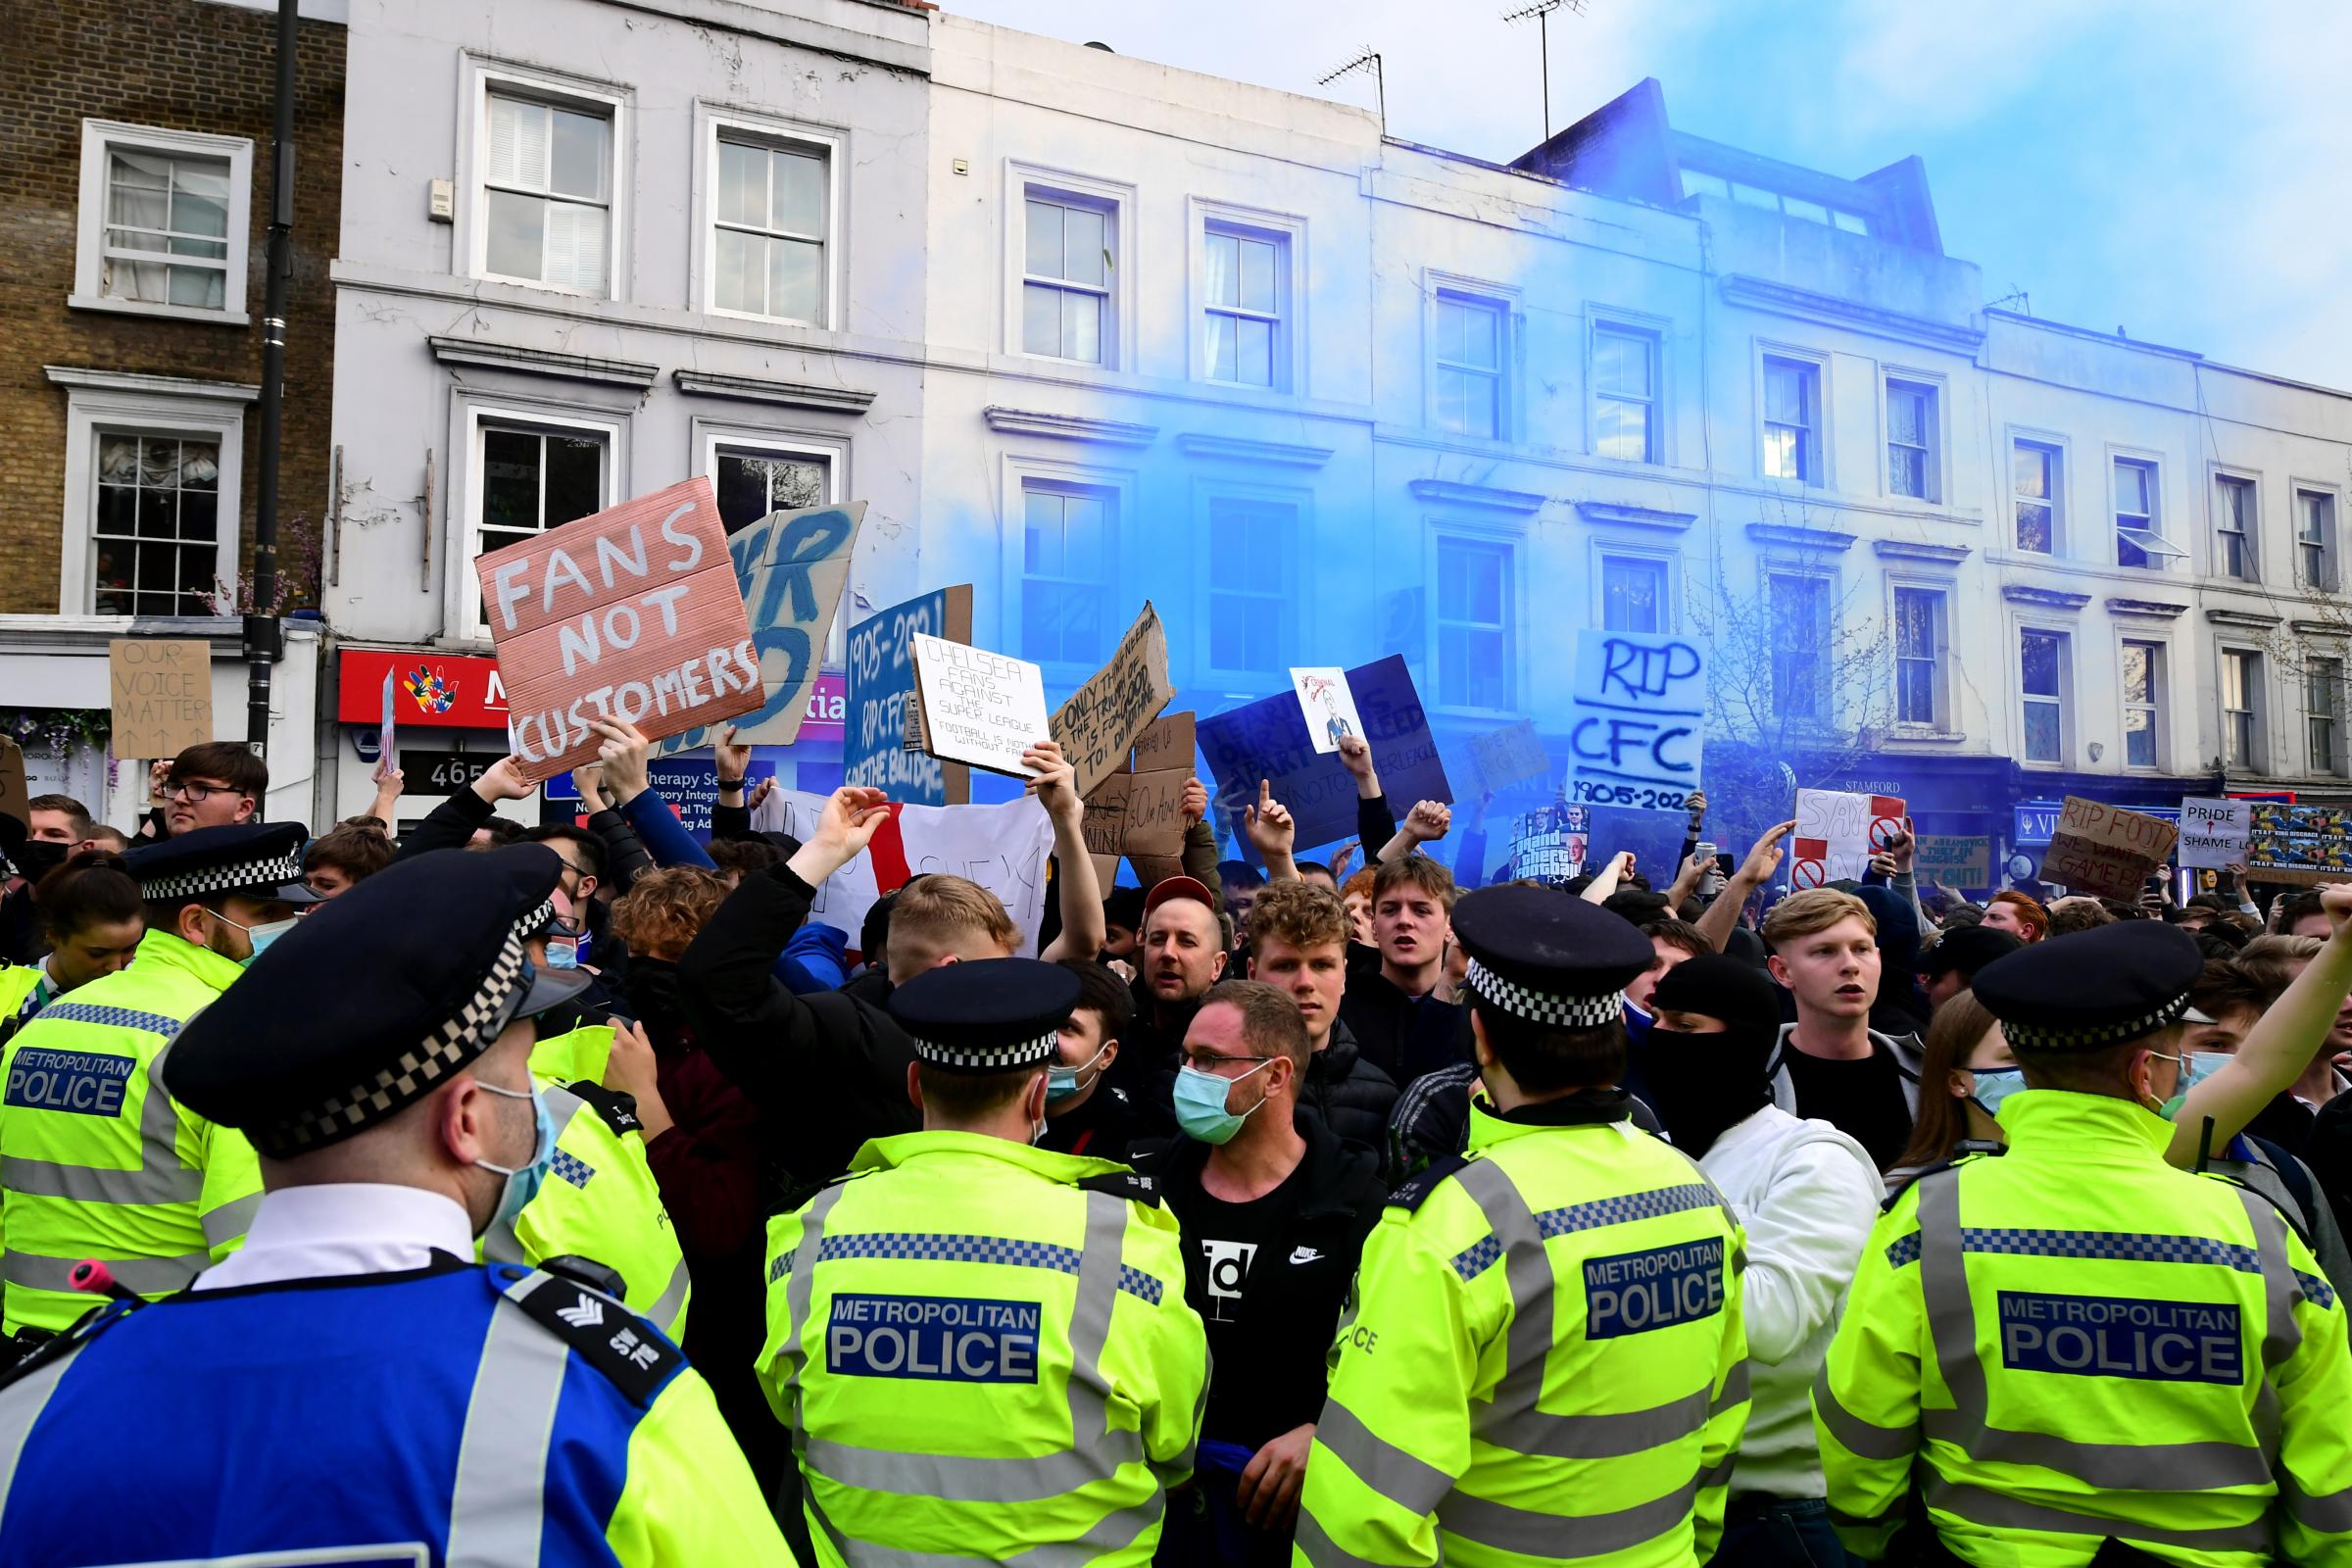 There was a lack of social distancing as protests took place outside Stamford Bridge. Credit: PA